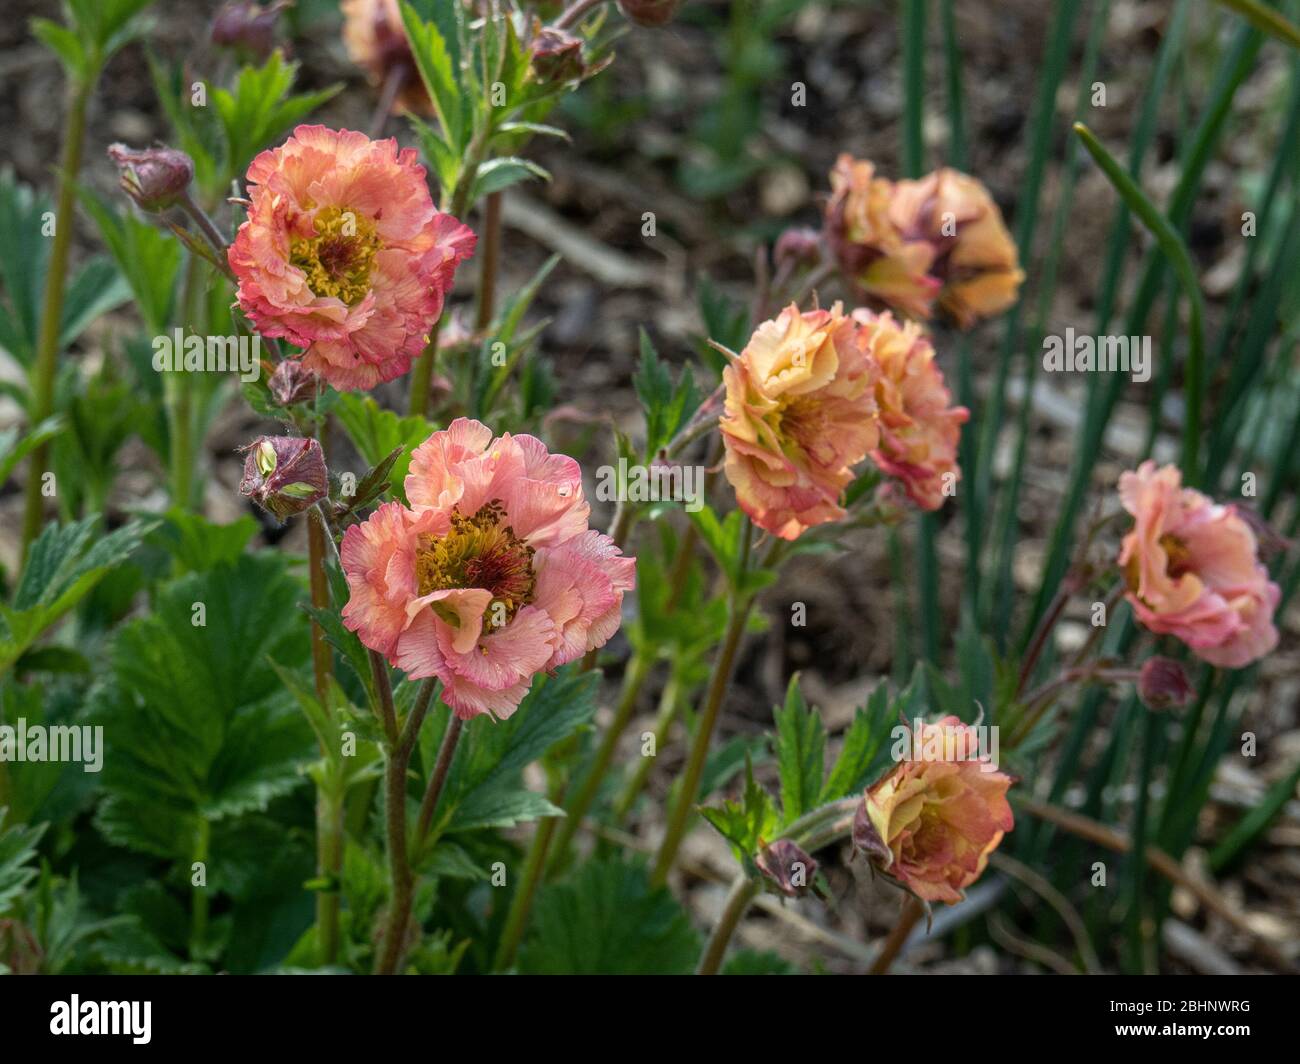 A group of the apricot pink semi double flowers of Geum rivale Mai Tai Stock Photo